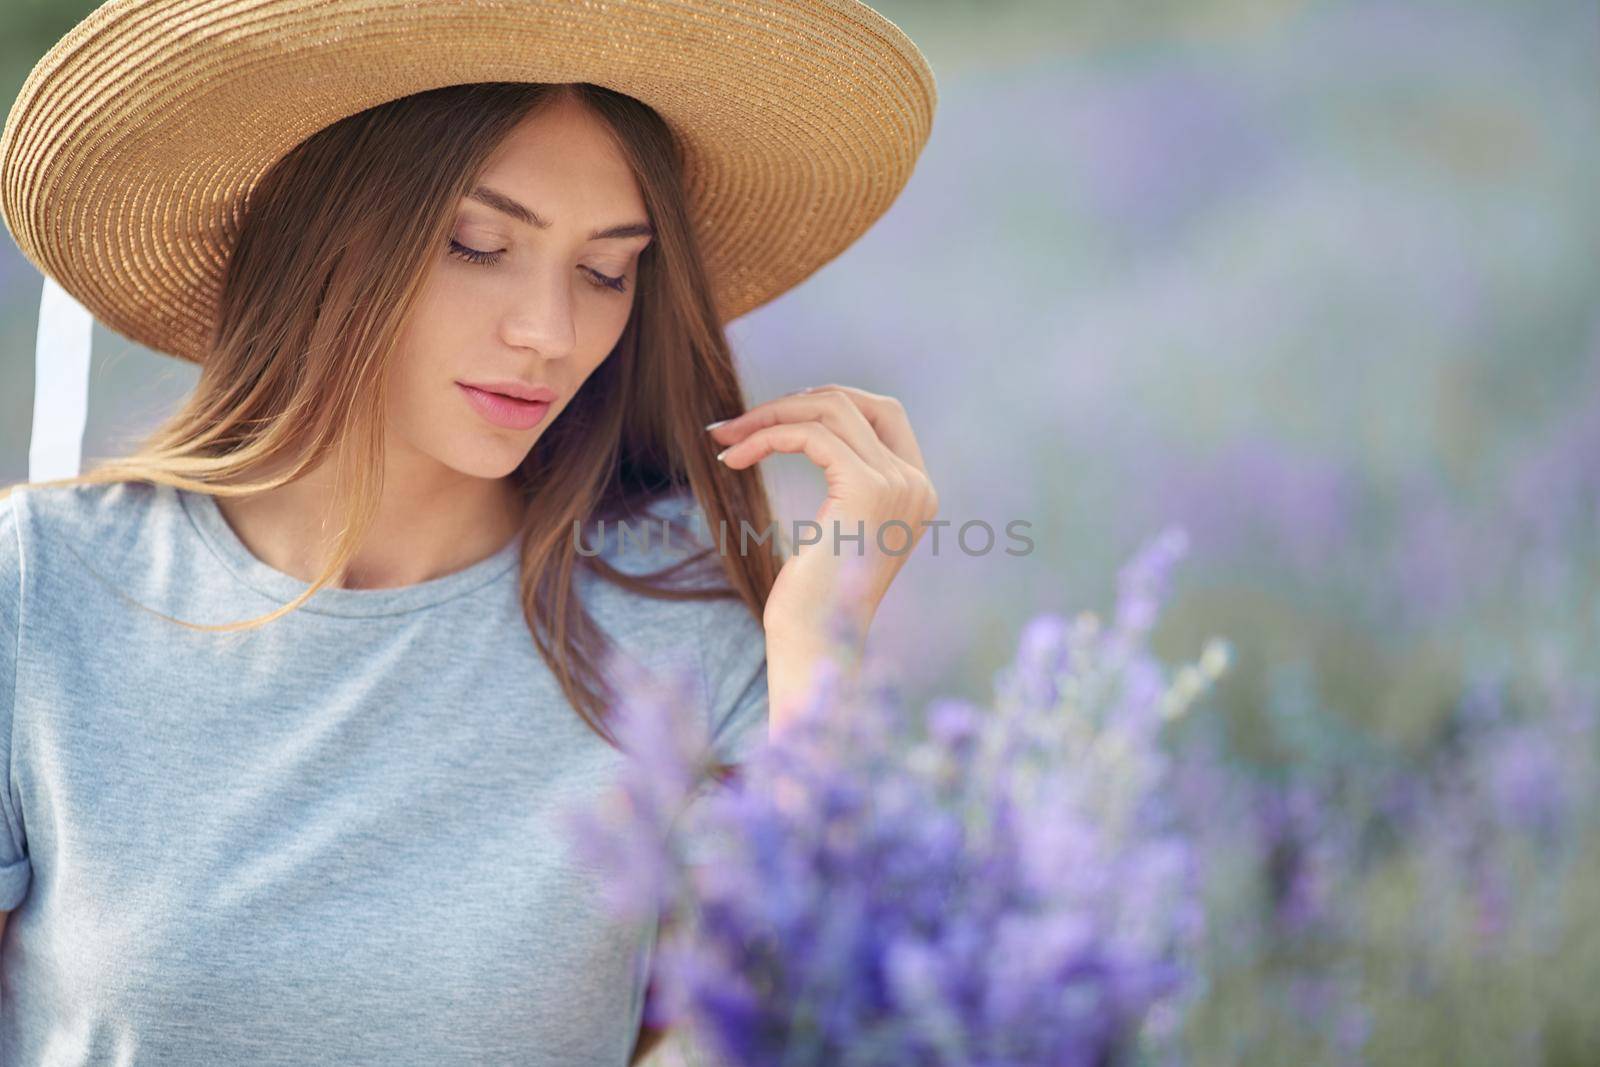 Stunning young woman sitting at table with lavender violet bouquet. Pretty fashionable girl wearing straw hat and blue dress posing in lavender field. Concept of nature, beauty, fashion.